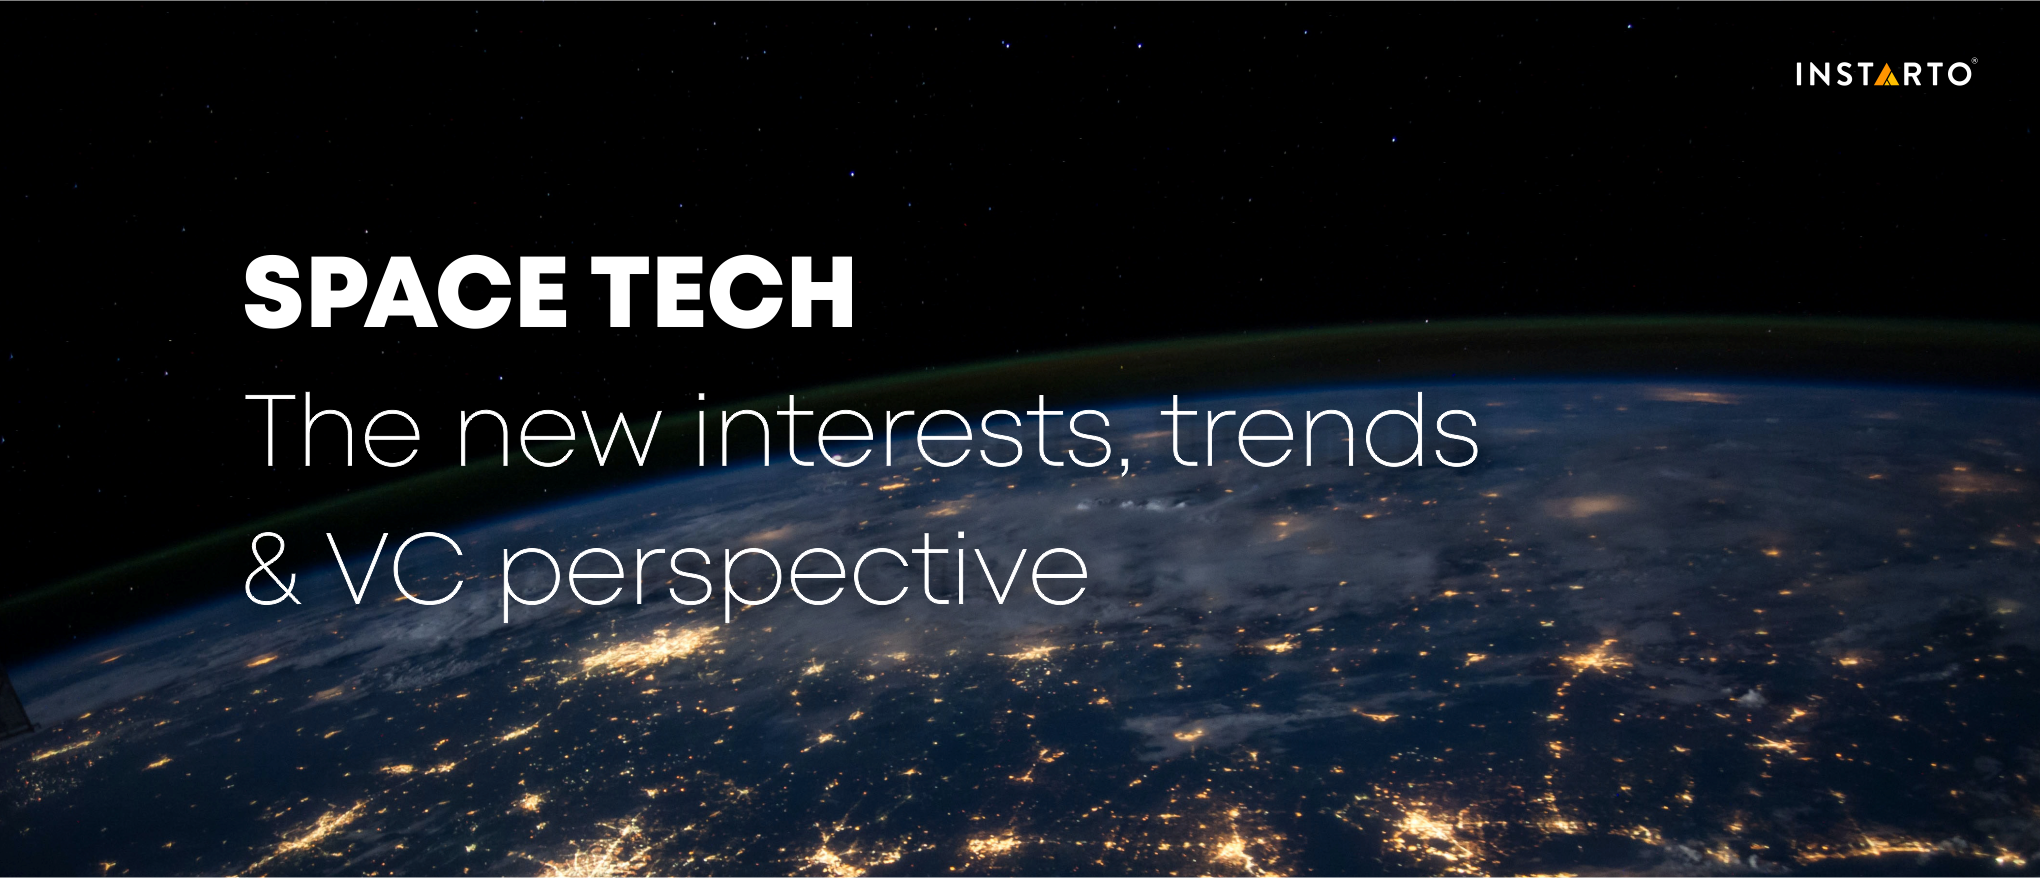 Space-tech-The-new-VC-interest-their-perspective-trends